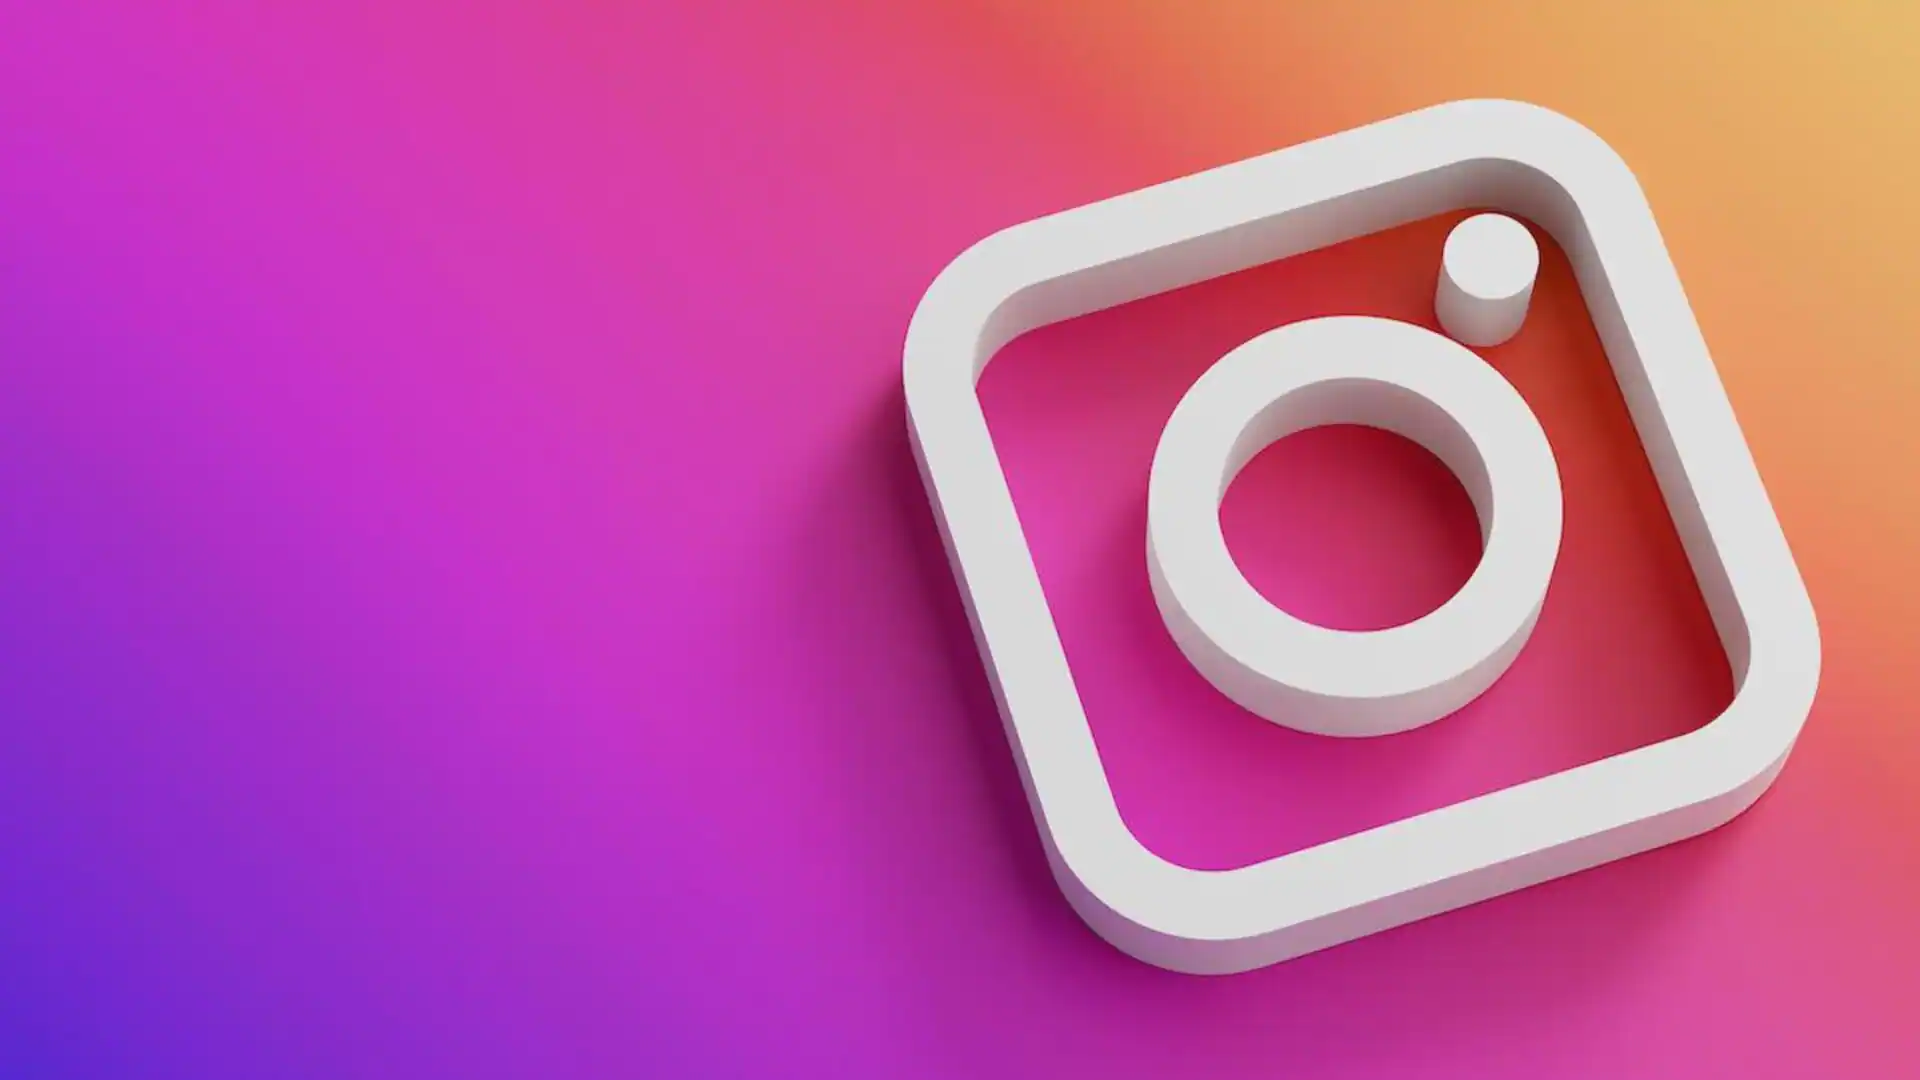 Instagram's New Blend Feature